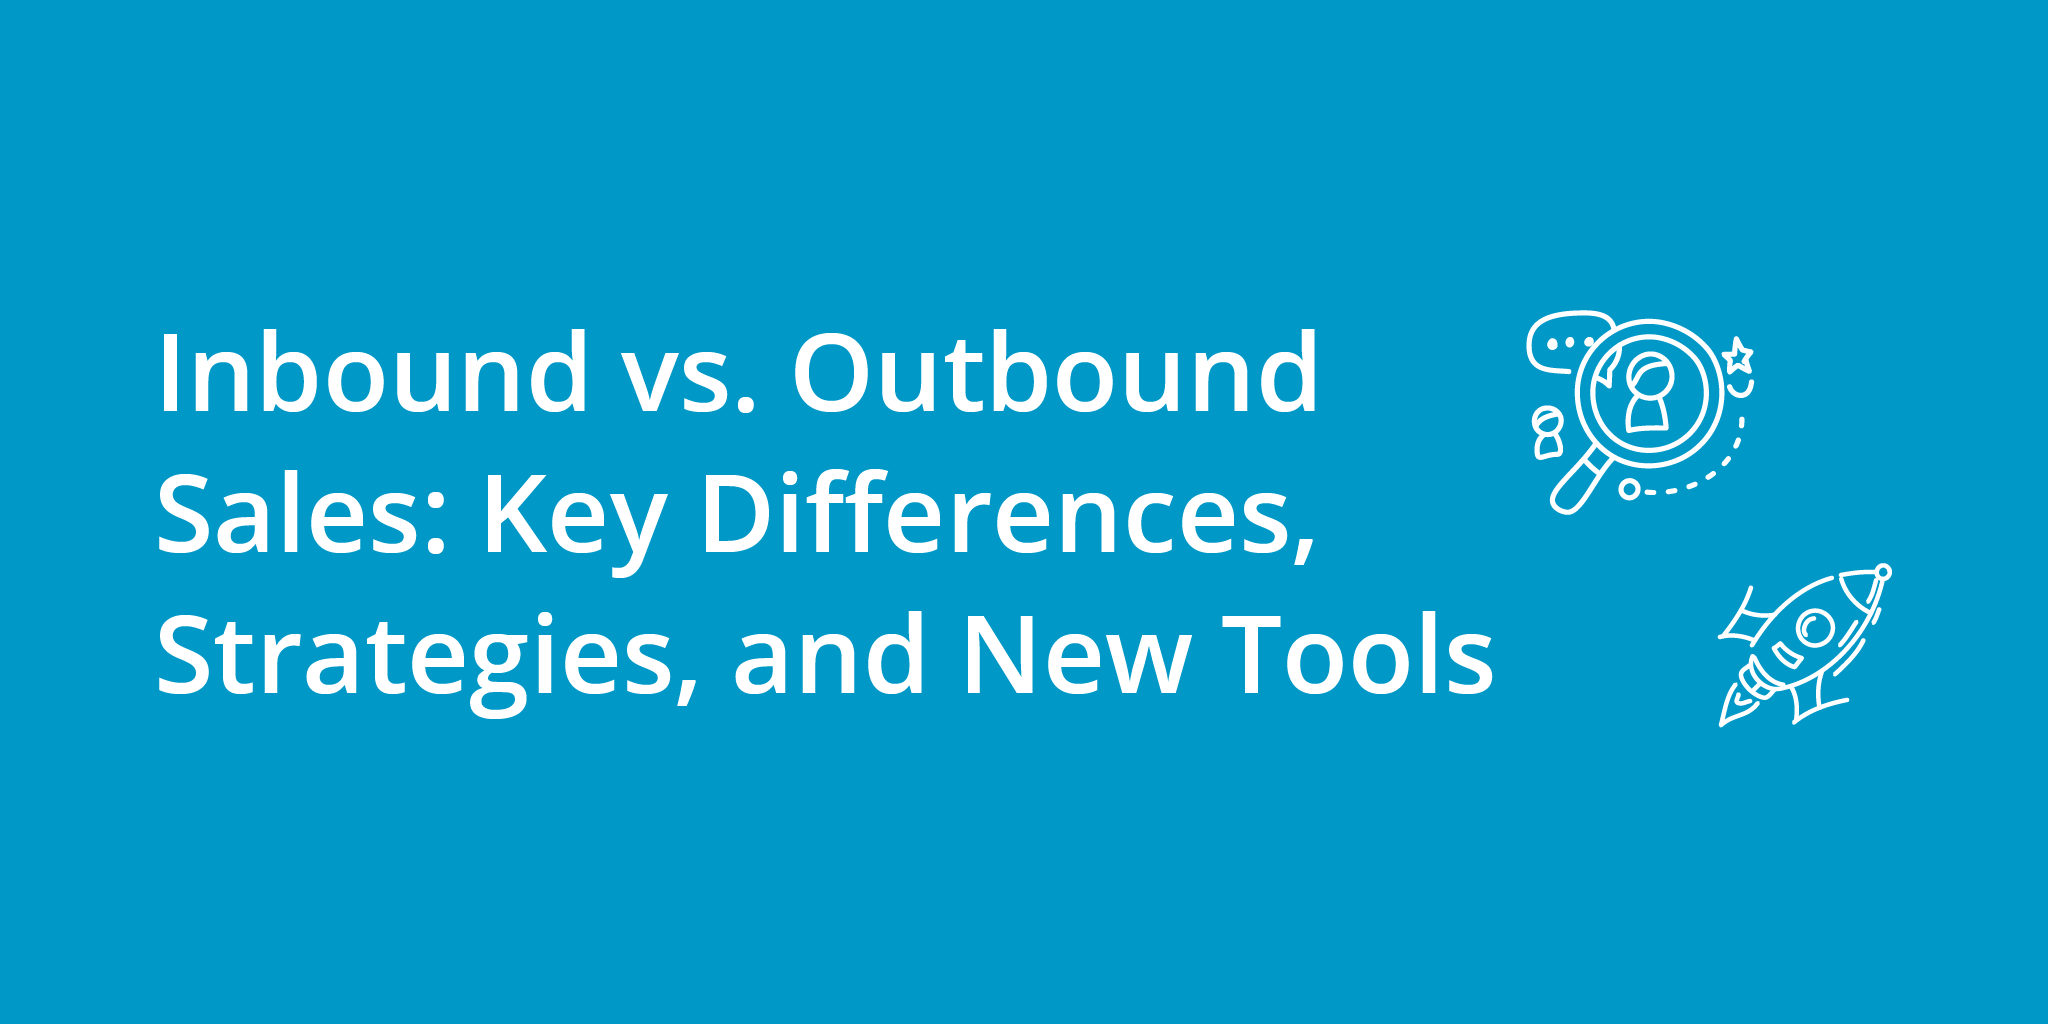 Inbound vs. Outbound Sales: Key Differences, Strategies, and New Tools